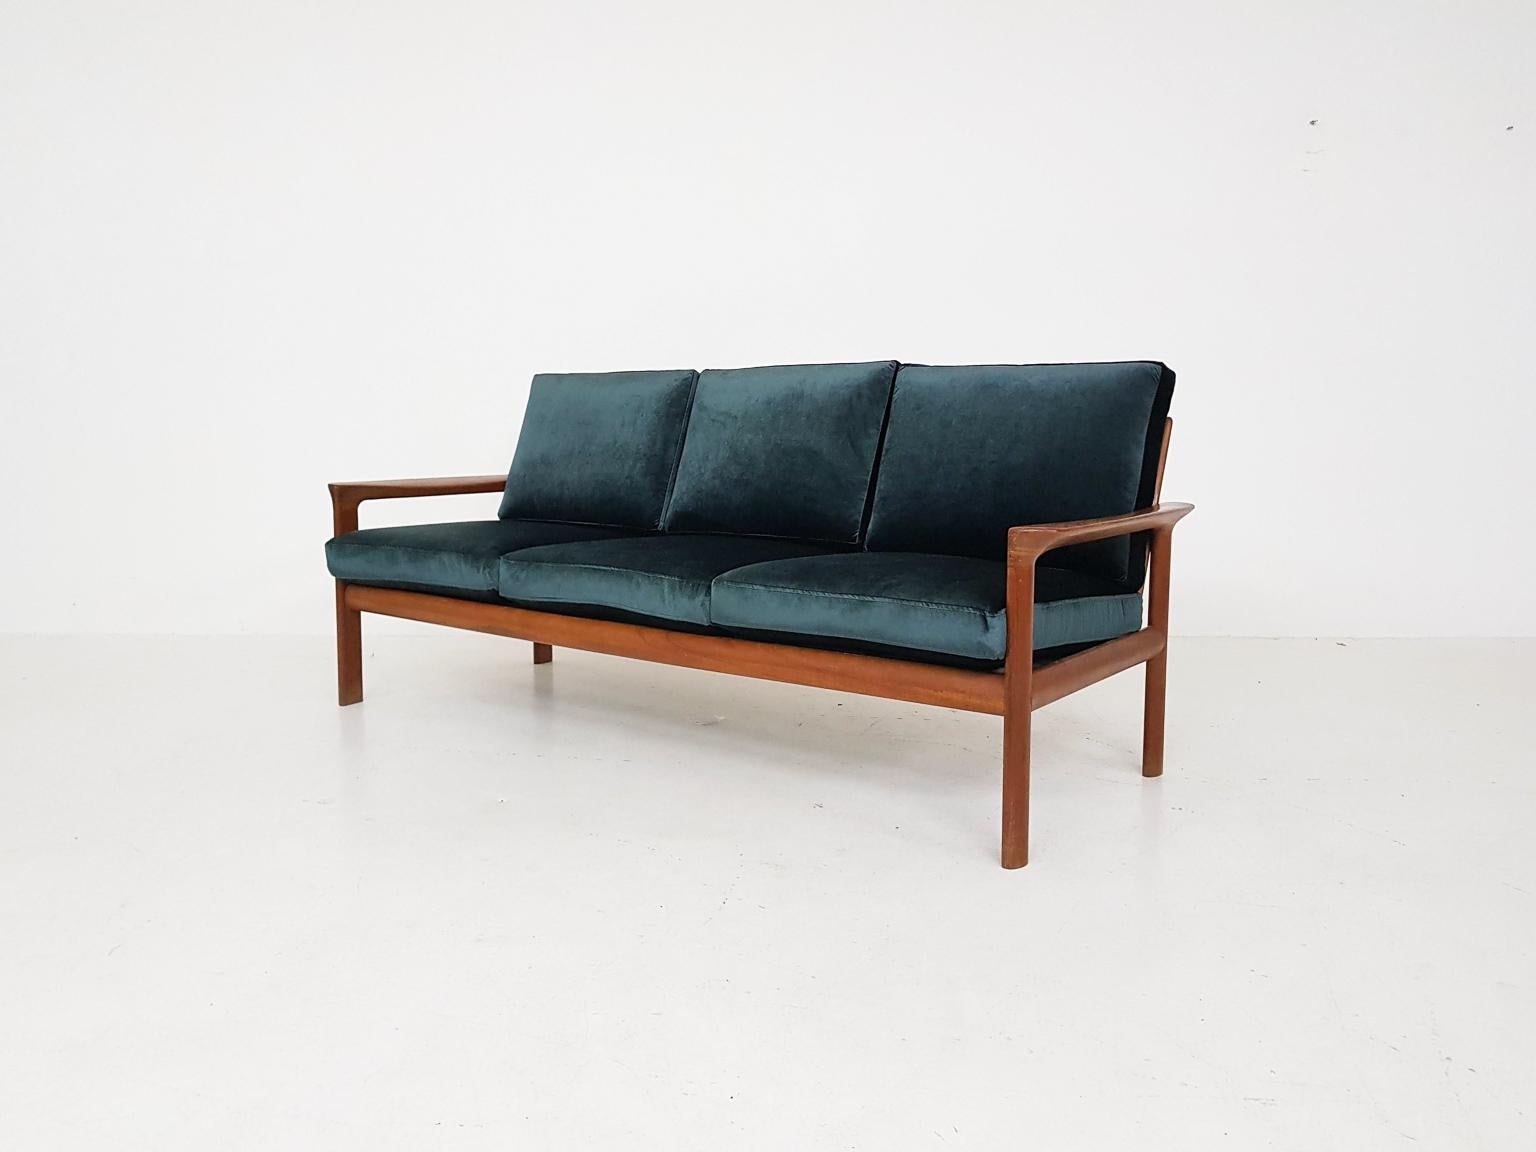 Velvet three-seat sofa by Sven Ellekaer for Komfort, Denmark, 1960s.

Beautiful sofa from Denmark. This sofa is designed by Sven Ellekaer and part of the “Borneo” seating group by Komfort. It is made of solid teak and in good condition. The